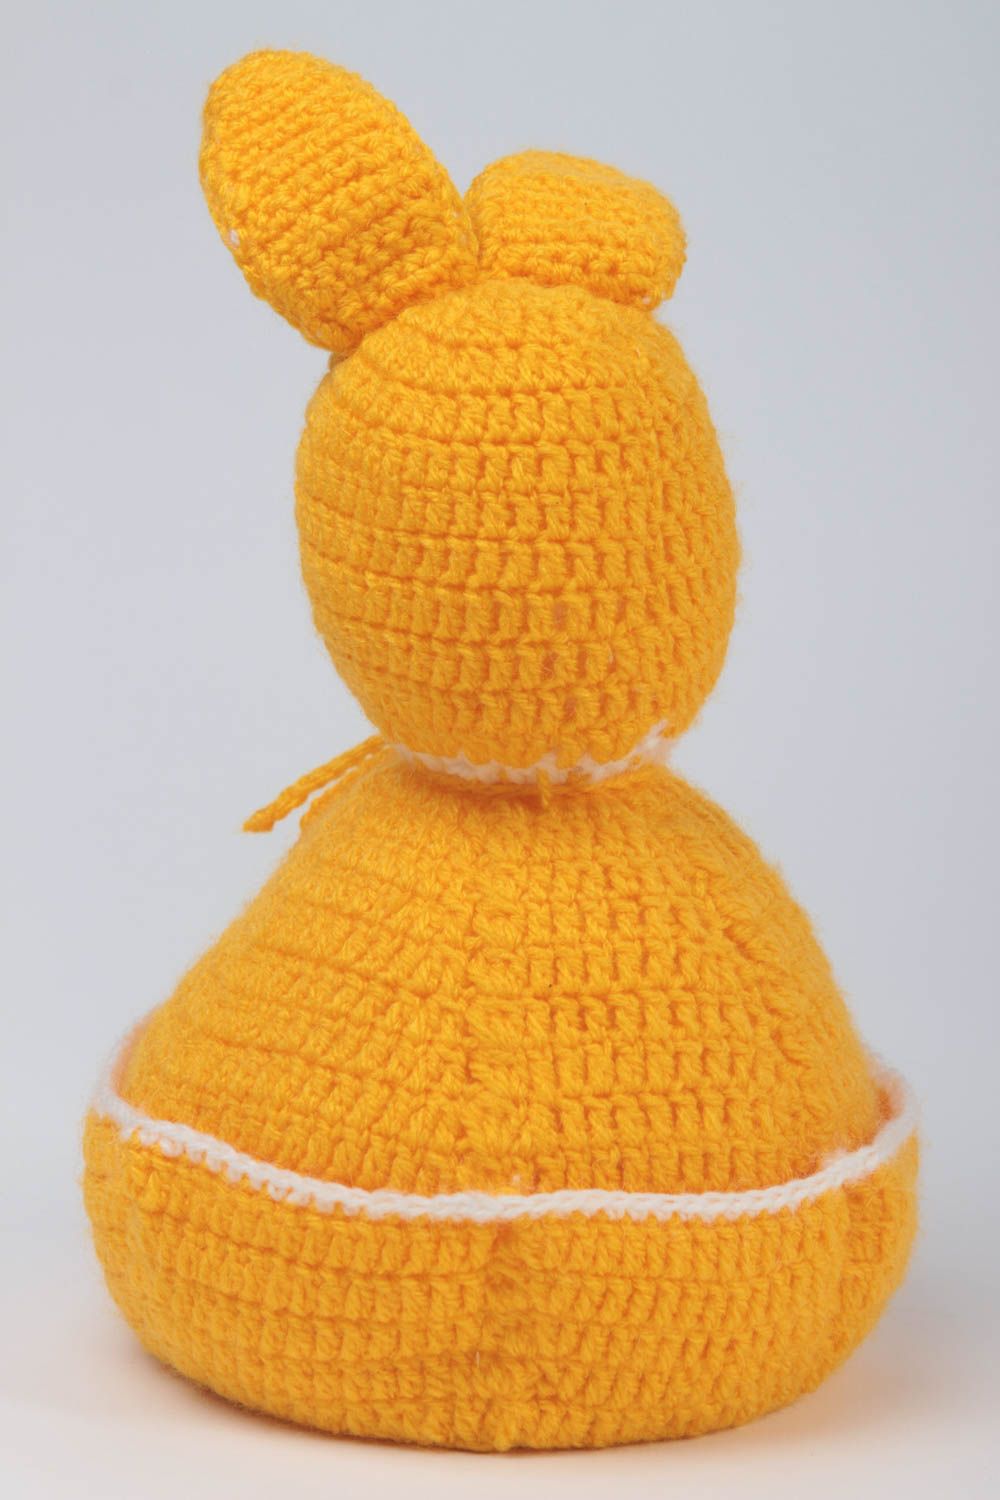 Crocheted handmade toy cute designer soft toy textile gifts for children photo 4